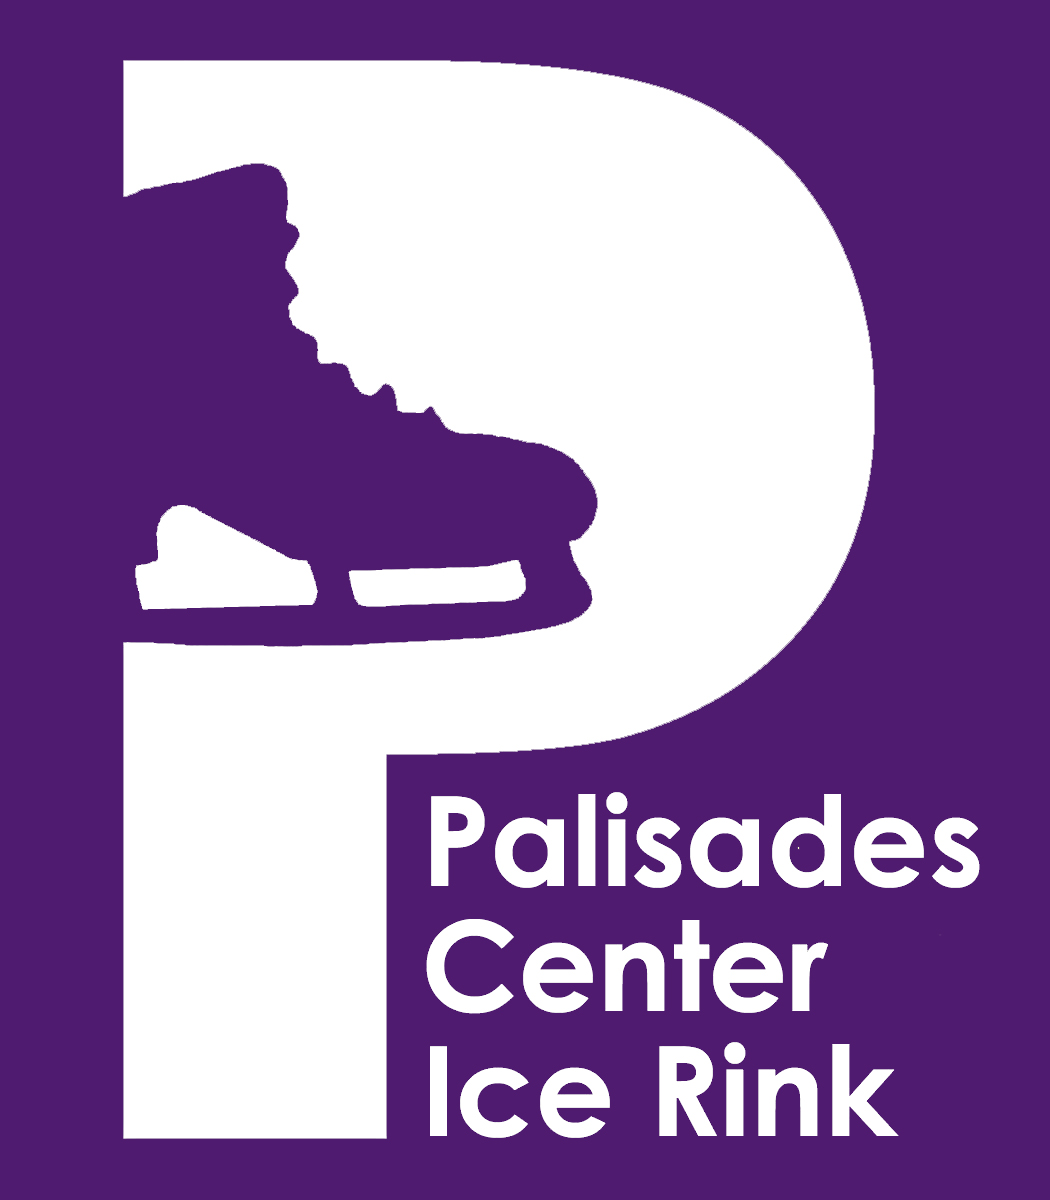 Hiring at the Ice Rink!